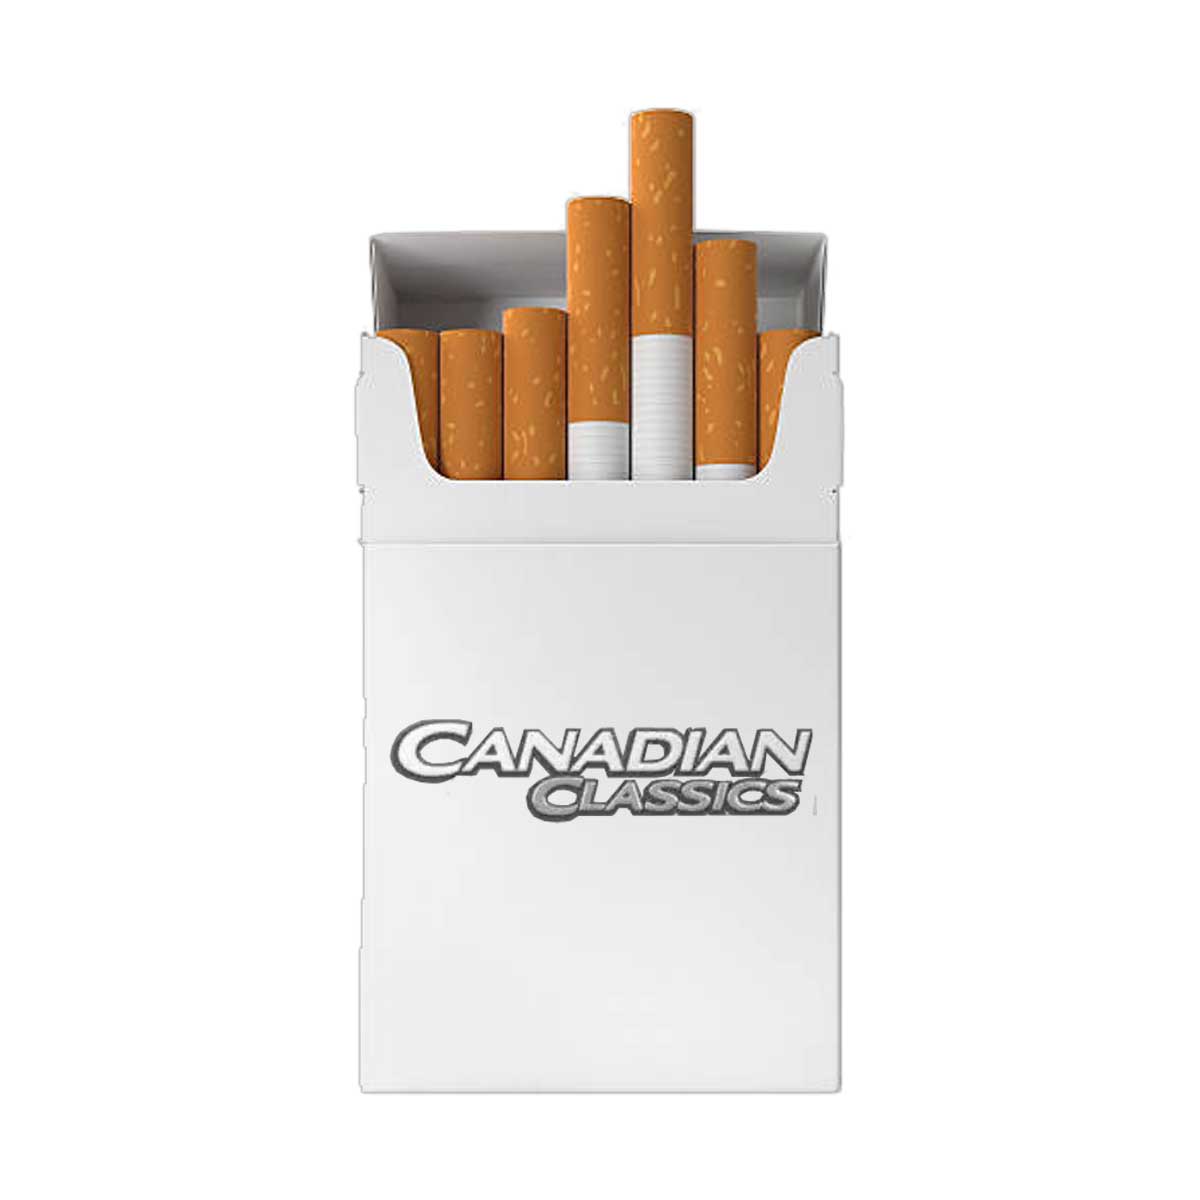 TAG Liquor Stores Delivery - Canadian Classic Silver Kings Cigarettes